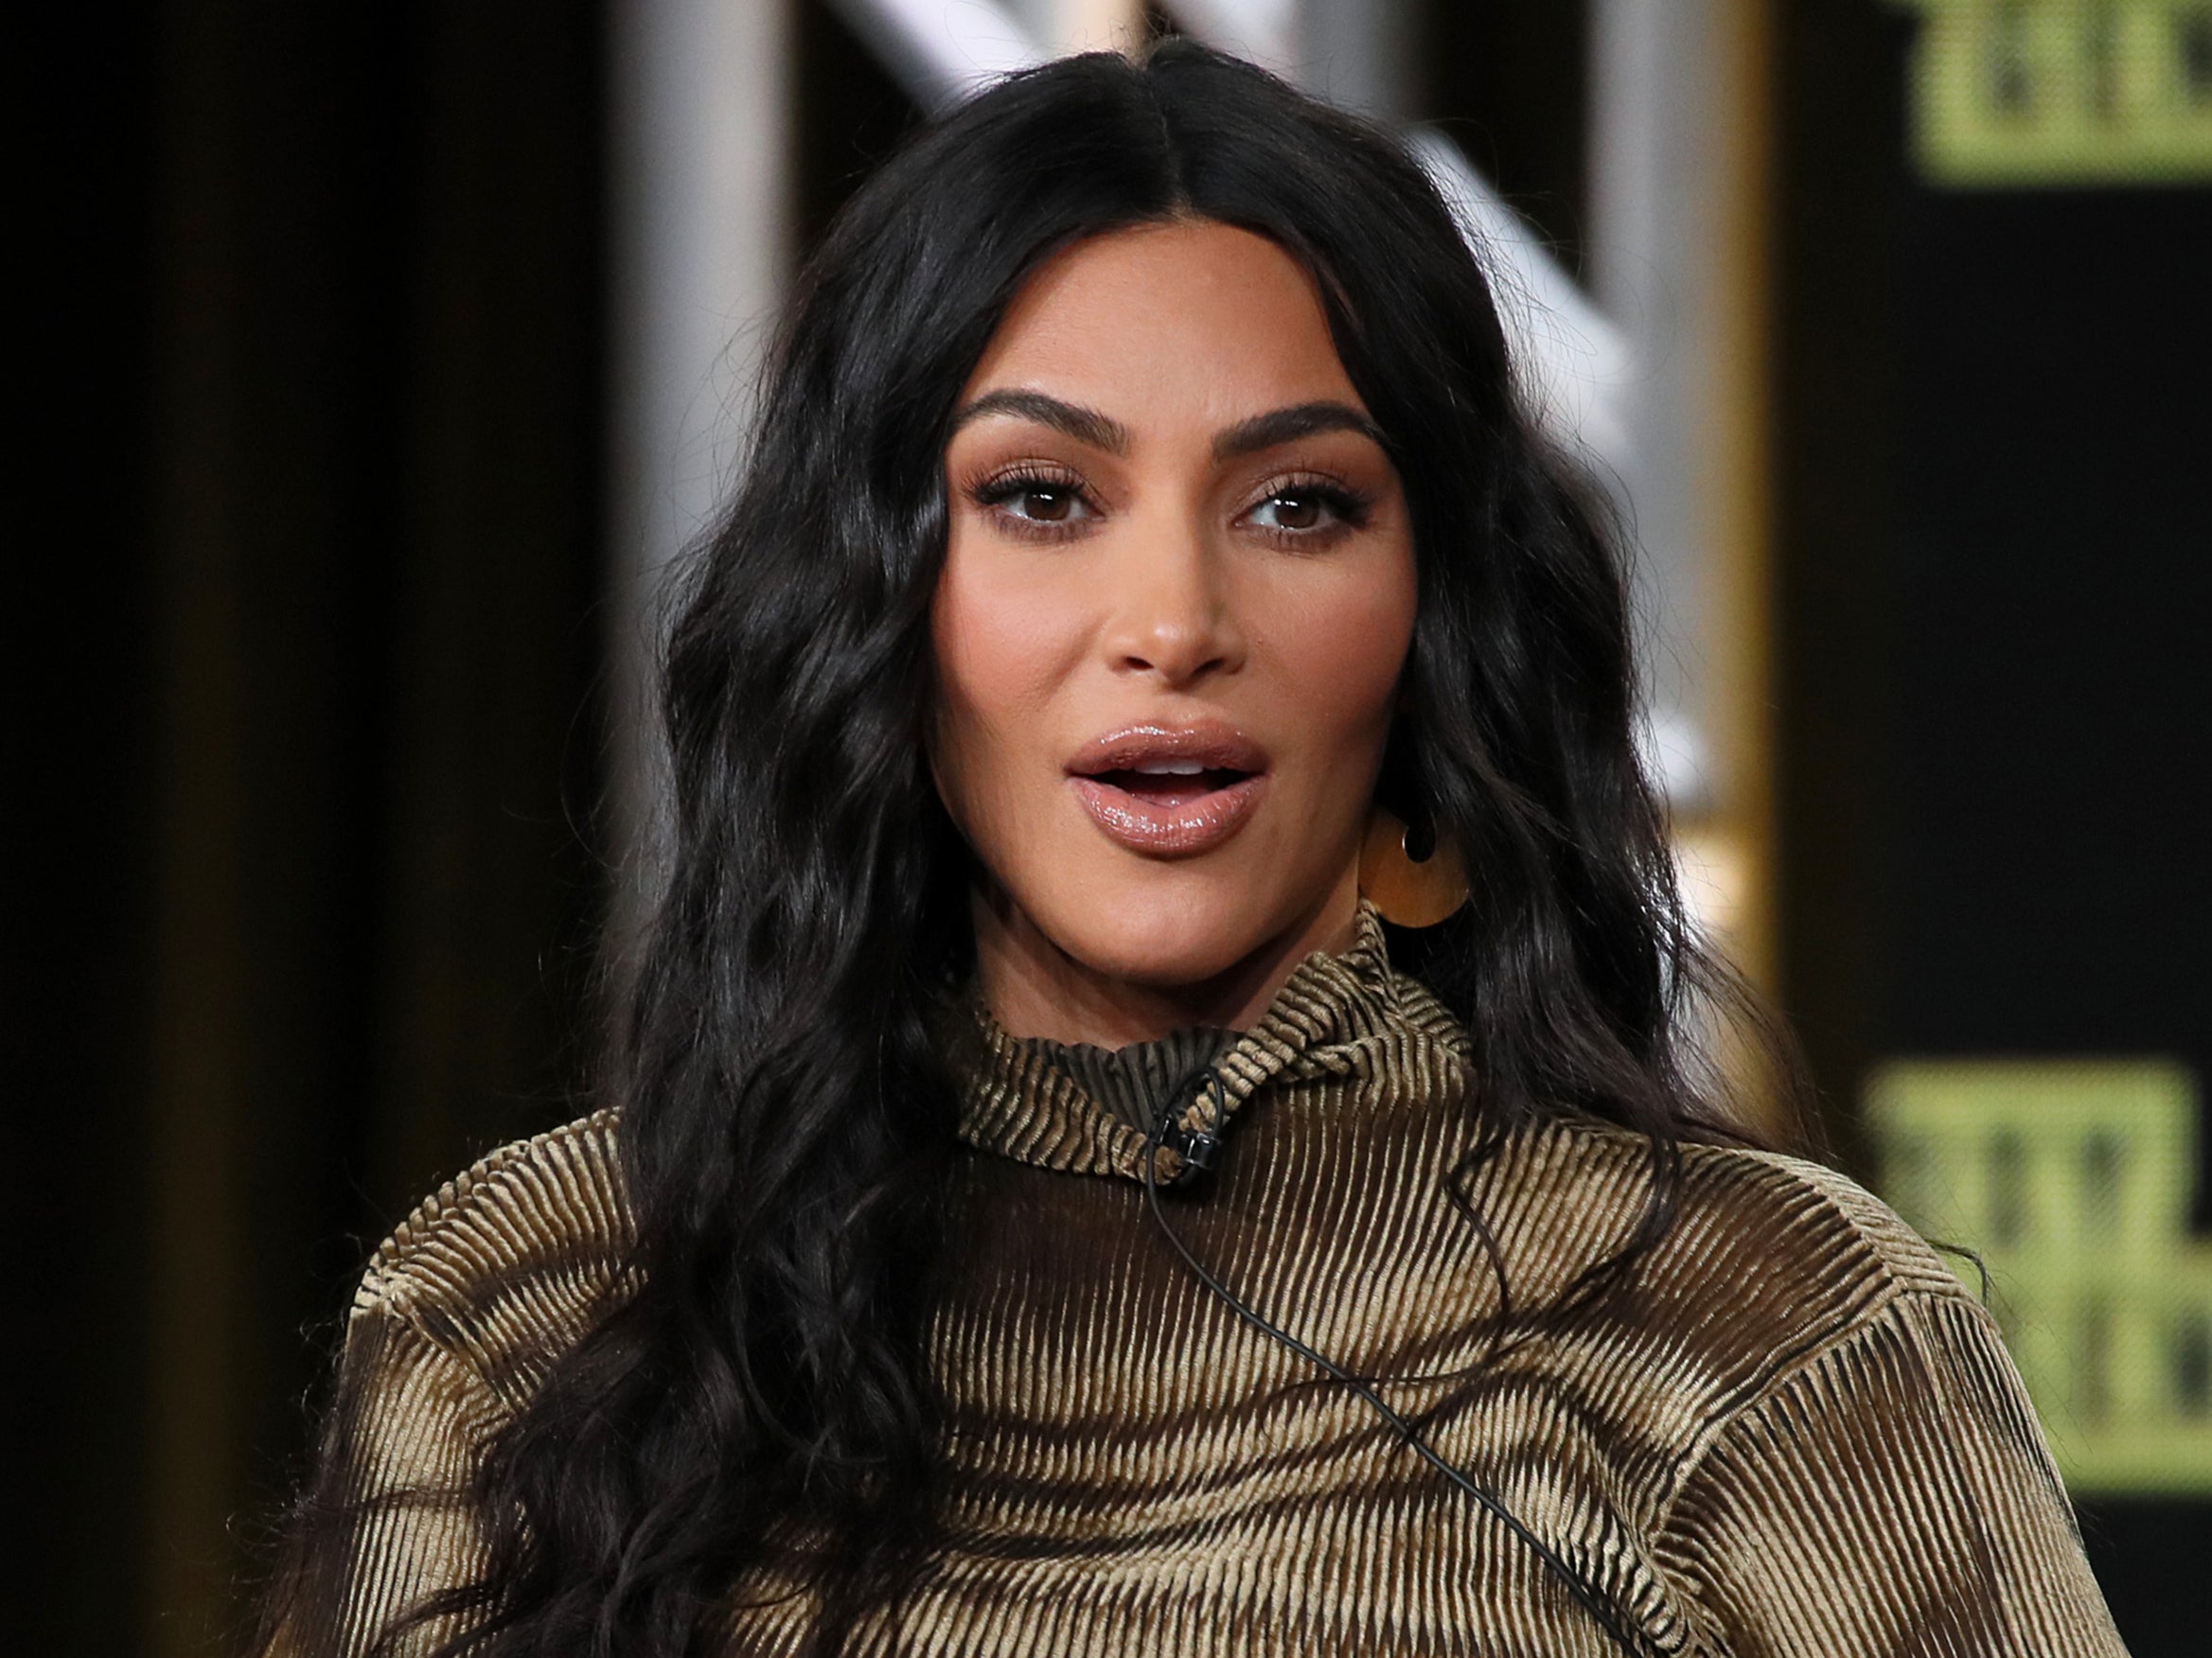 Kim Kardashian West discussed the documentary ‘The Justice Project’ on 18 January 2020 in Pasadena, California